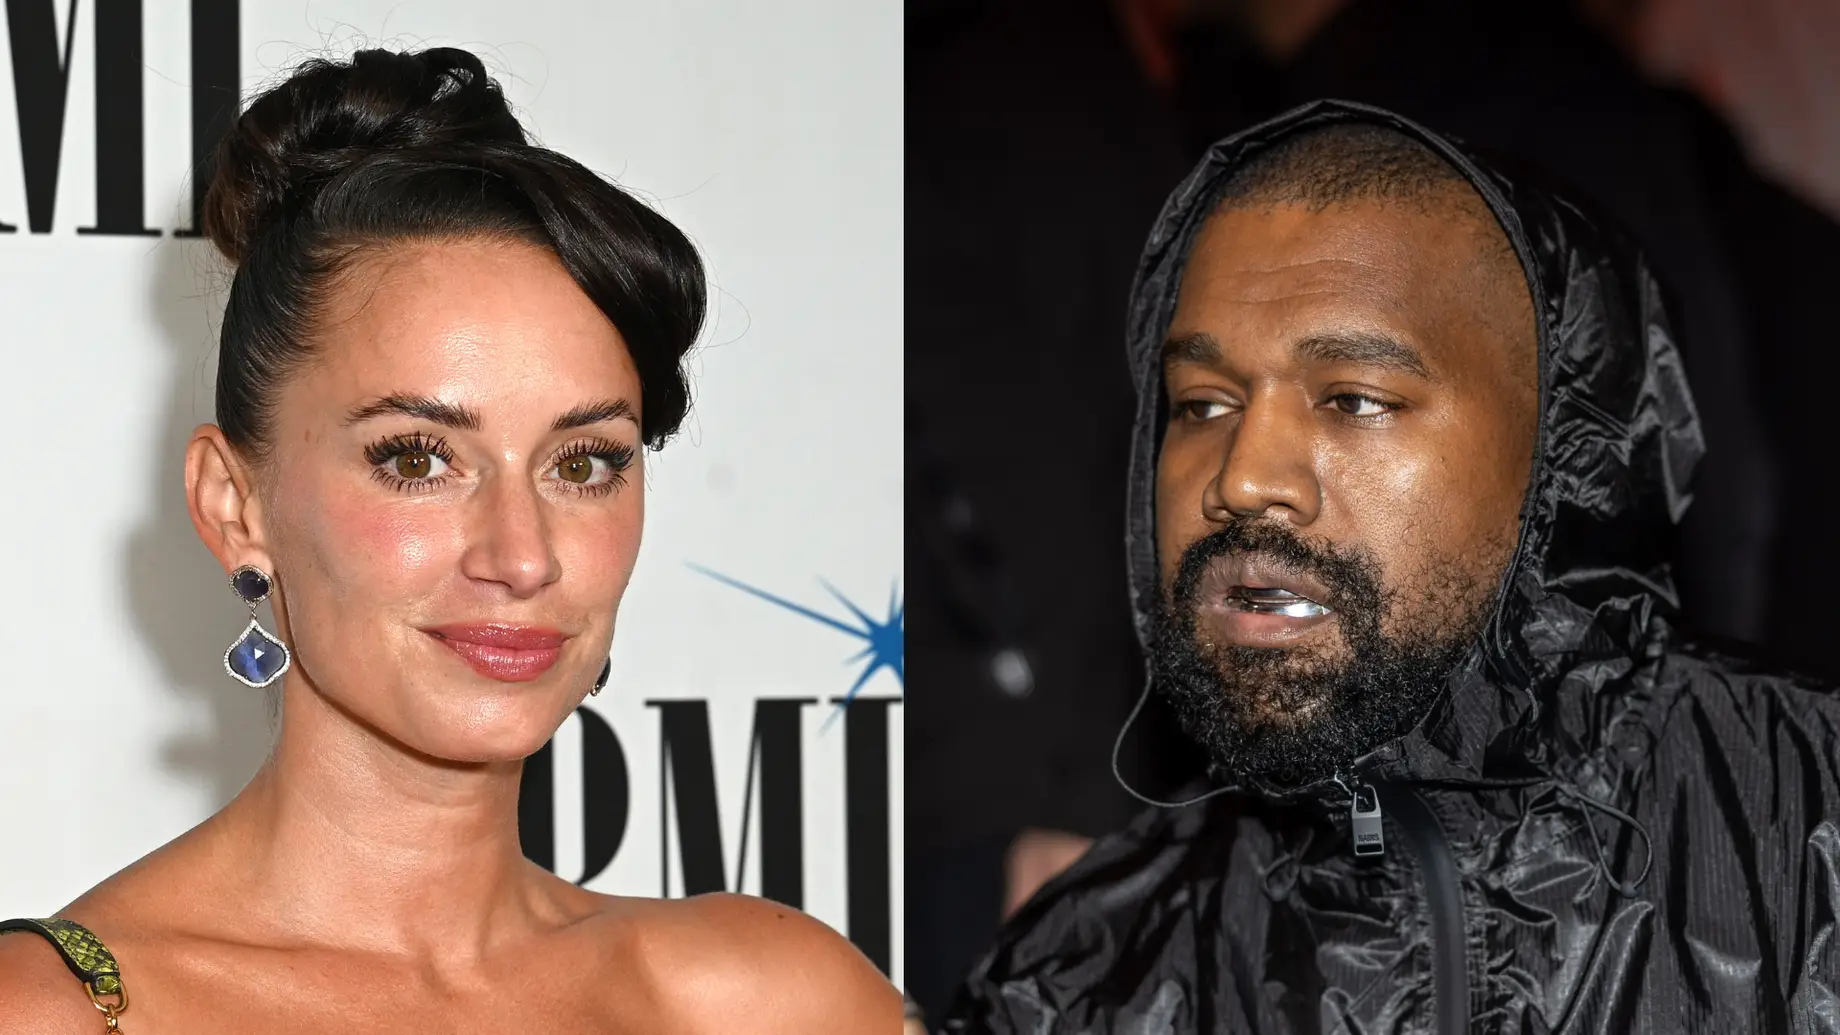 YesJulz Plans Countersuit Against Ye, Says She Tried to Contact Him to Prevent It